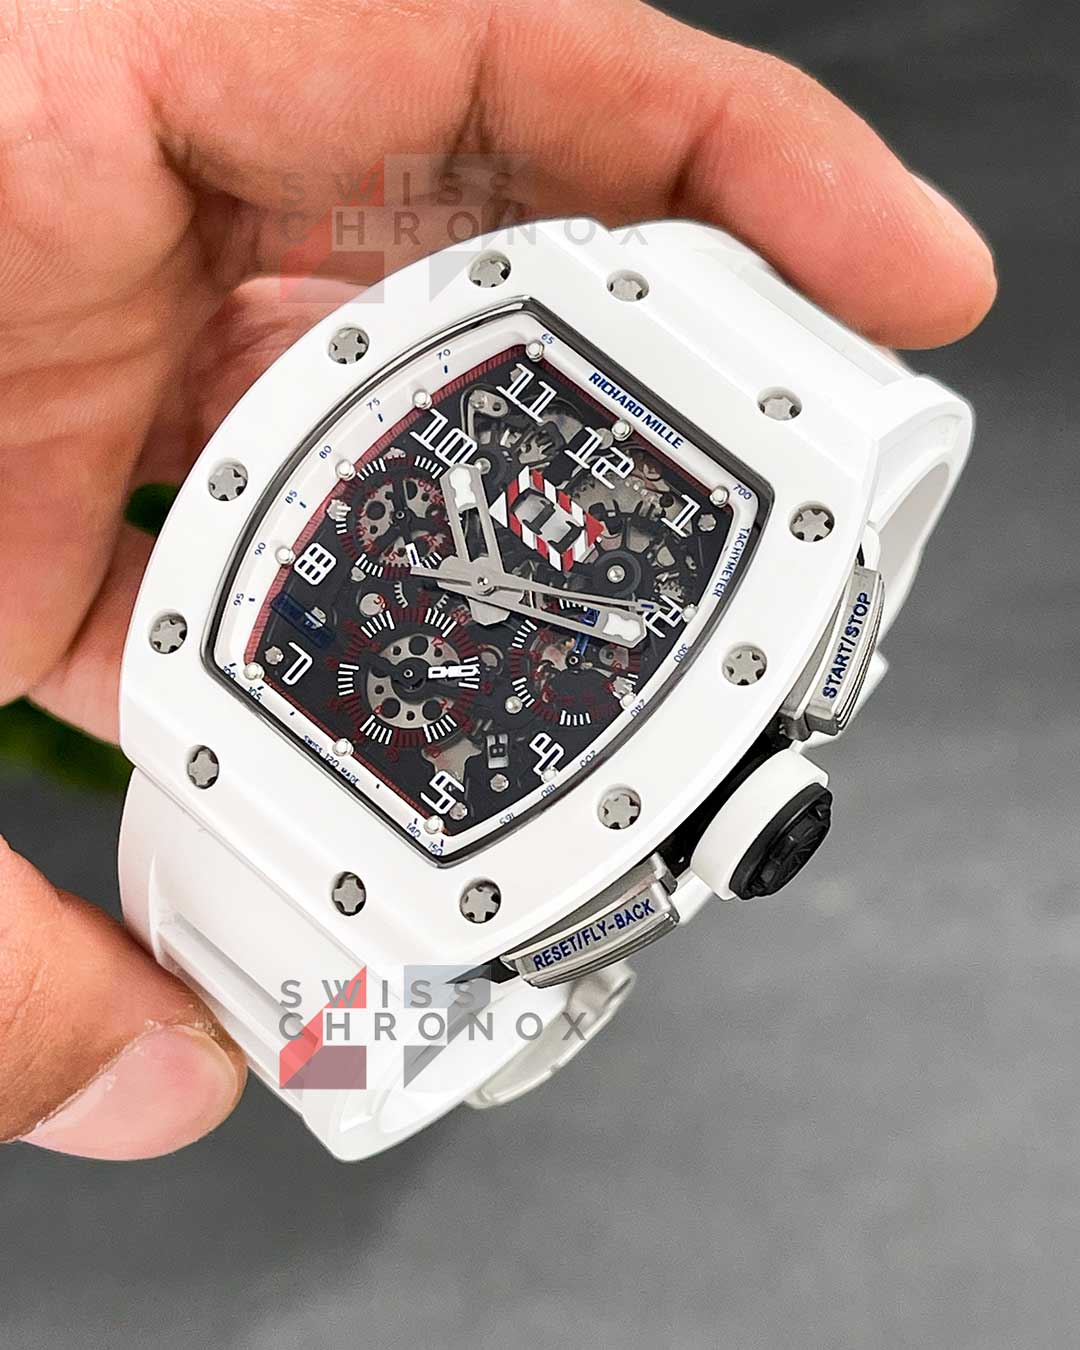 richard mille rm 011 ceramic ntpt asia limited edition